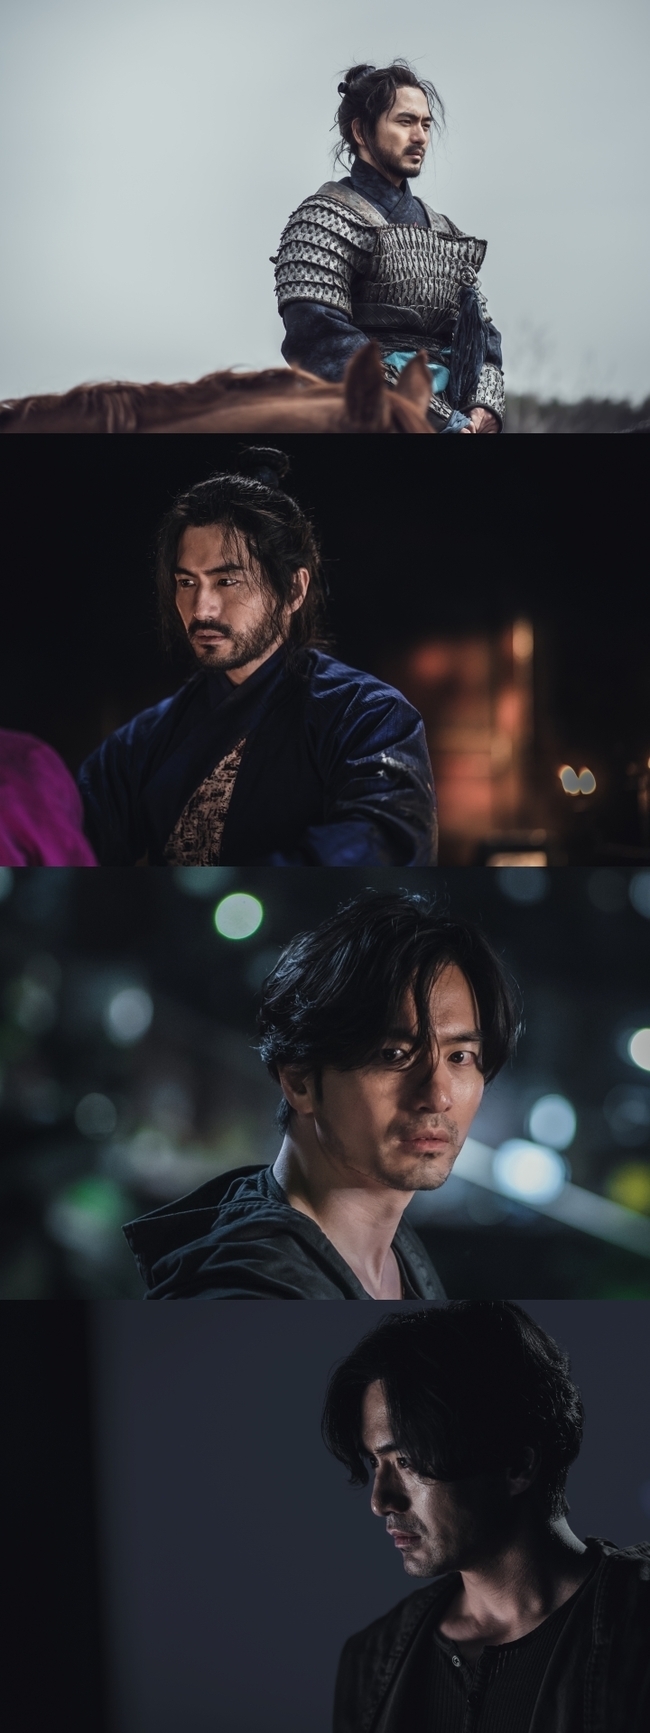 Lee Jin-wook, an Irreplaceable You Sal, who can not kill or die, has been released.TVNs new Saturday, Irreplaceable You Sal (playplayed by Kwon So-ra, Seo Jae-won/directed by Jang Young-woo), is a drama about a sad but beautiful story of a man who has become an Irreplaceable You Sal (), who cant kill or die, chasing a woman who repeats Dead Again for 600 years.Actor Lee Jin-wook was a human being 600 years ago, but played the role of a being who became Irreplaceable You.With the presence of a Korean-style and new immortality (), which has been in the ancient times of the Korean peninsula, it will take an extraordinary challenge to show the depth and explosiveness of emotions that can not be easily measured in the inside as well as external visuals.The first Character photo released on November 23 shows both the past and the present, and the appearance of Lee Jin-wook in both eras.First, 600 years ago, I feel the unusual spirit of warriors in a thick armor and a horse.The sharp eyes that look at the situation suggest how he has been commanding the battlefield, and the eyes that take off his armor and look at someone in a military blue hanbok are curious to see somewhere.After he became Irreplaceable You, 600 years of being reborn, even if he was stabbed in a spear and burned off a cliff, he felt pain and felt a curse of terrible immortality.What remains of the loser who has lost everything is only a vengeance toward a woman who made herself this way.In this way, only cold anger was on the face of Irreplaceable Yousal, who lived until the present day to find a woman Min Sang-woon who repeated Dead Again.I wonder about his () frosty story, which he would have endured for a long time alone to pay his enemies, as he cut his head, which had been in a robe behind the lights of the city, and the change in his jacket, not his armor, was surprised.In addition, Actor Lee Jin-wooks Aura, which emits charisma and presence that can not be encountered in a completely different time zone of drama and drama, is waiting for a hot-rolled event that will double expectations and make the whirlpool of fate even hotter.